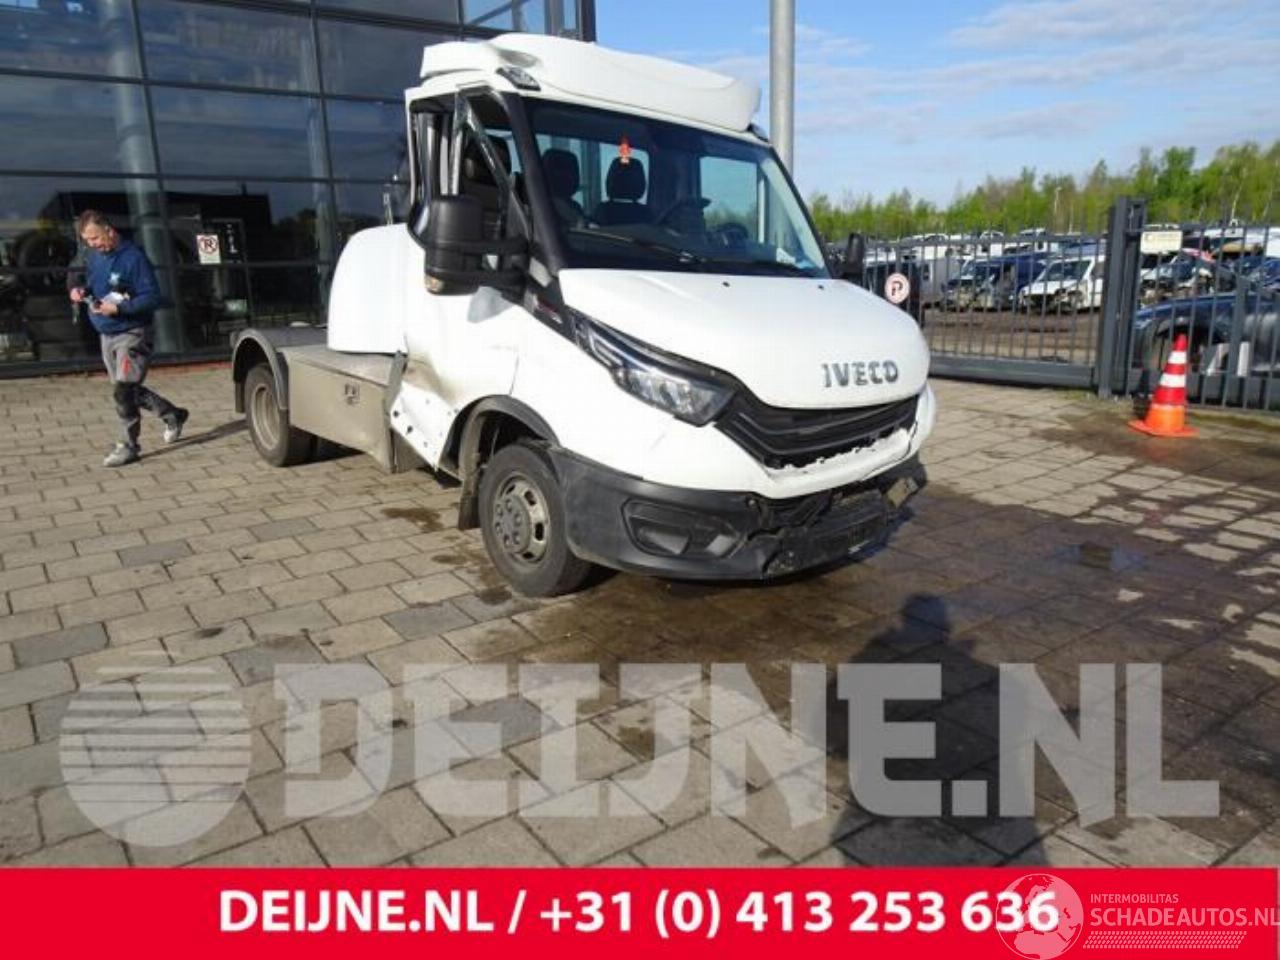 Iveco New Daily New Daily VI, Chassis-Cabine, 2014 35C18,35S18,40C18,50C18,60C18,65C18,70C18